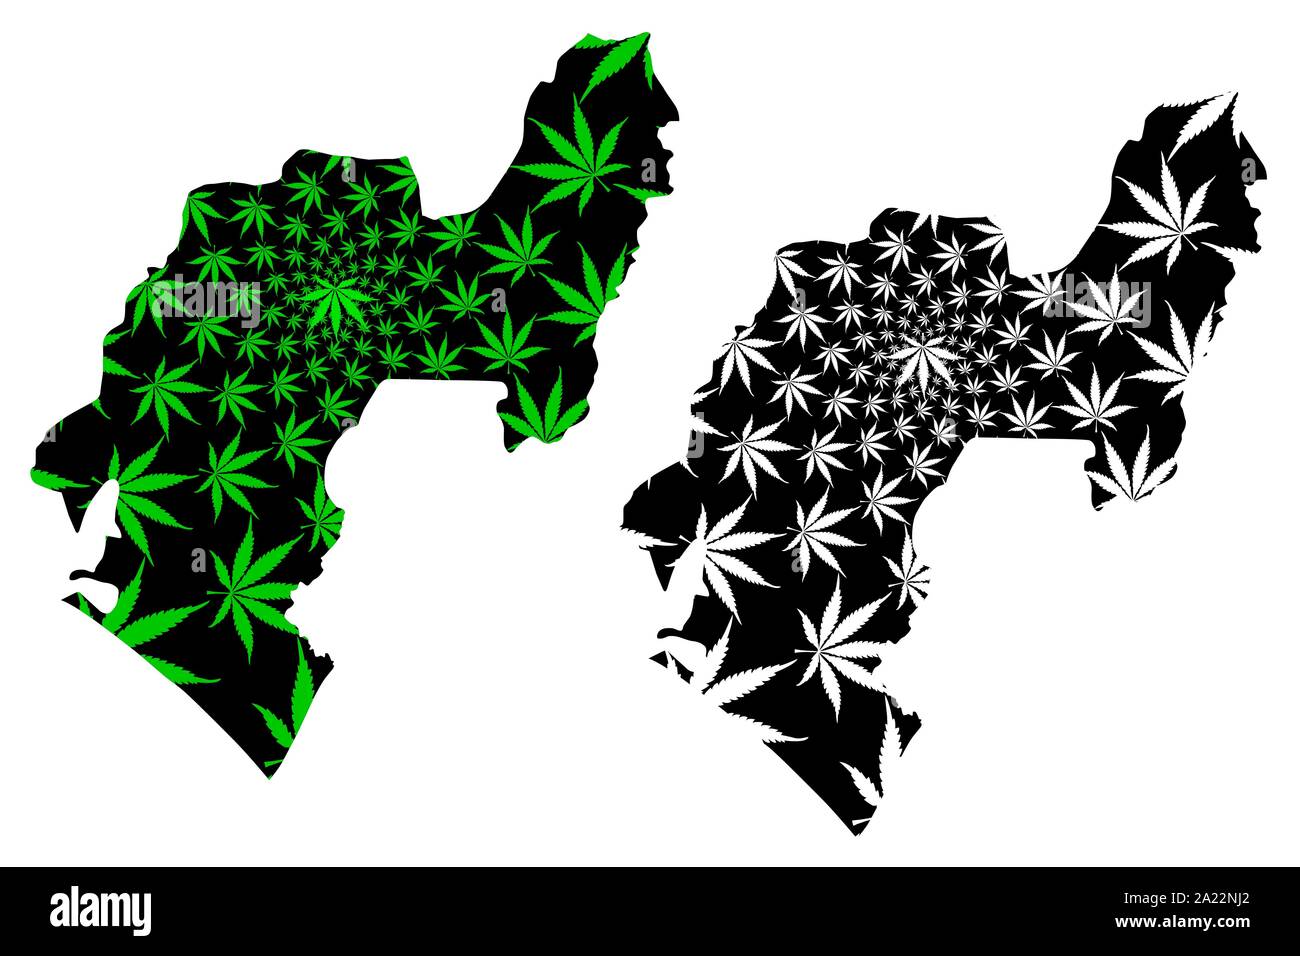 Ondo State (Subdivisions of Nigeria, Federated state of Nigeria) map is designed cannabis leaf green and black, Ondo map made of marijuana (marihuana, Stock Vector